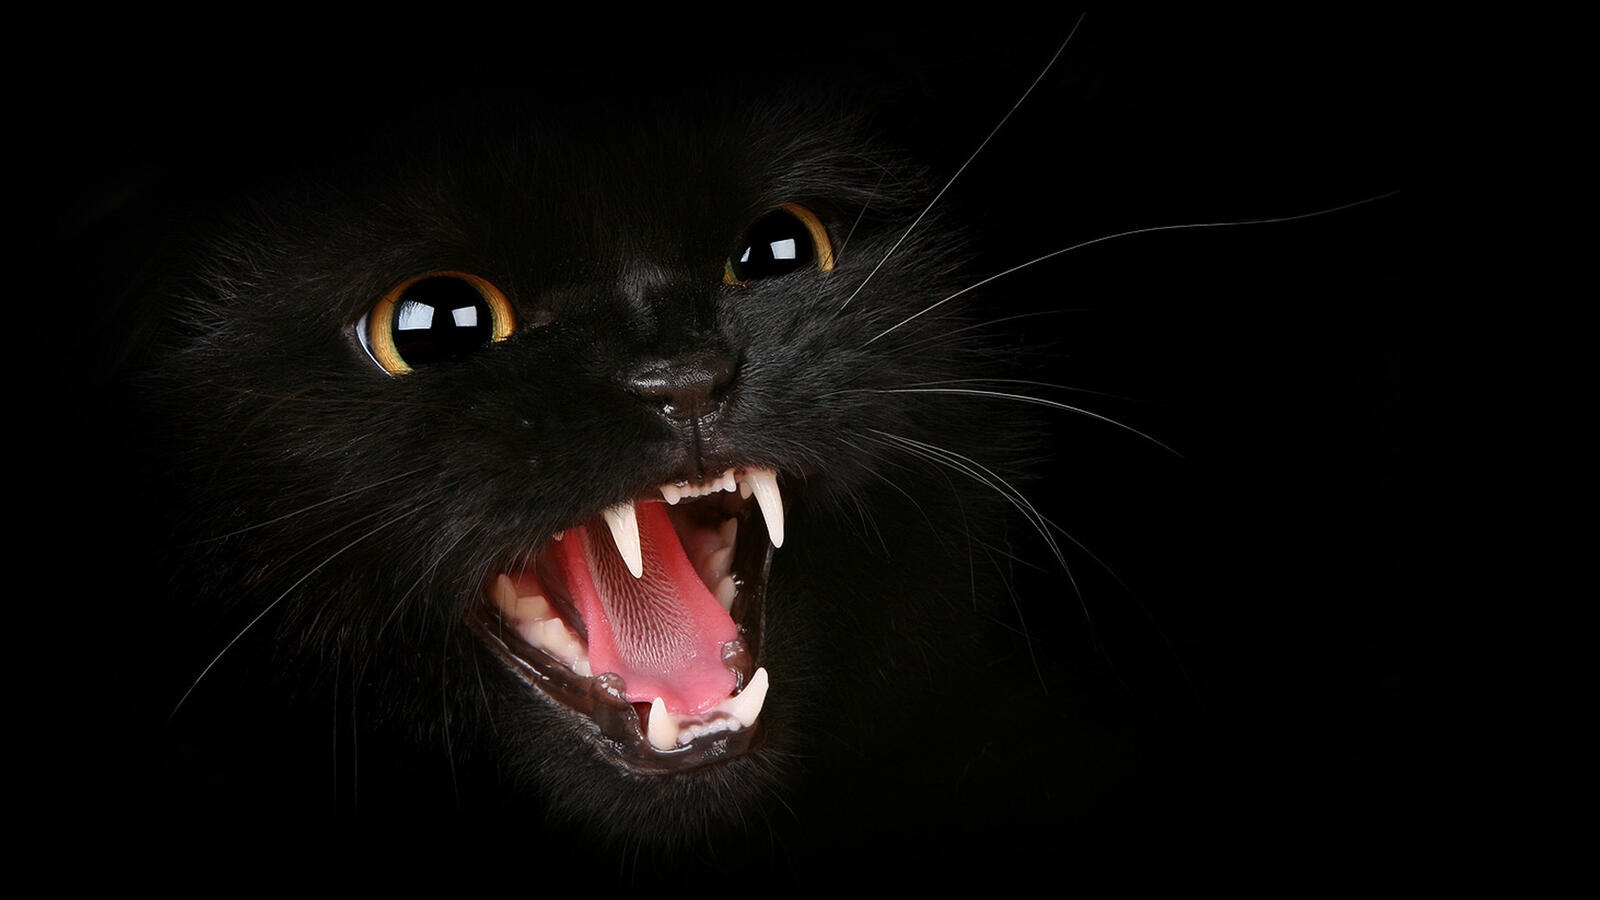 Free photo A black cat on a black background hisses at the viewer